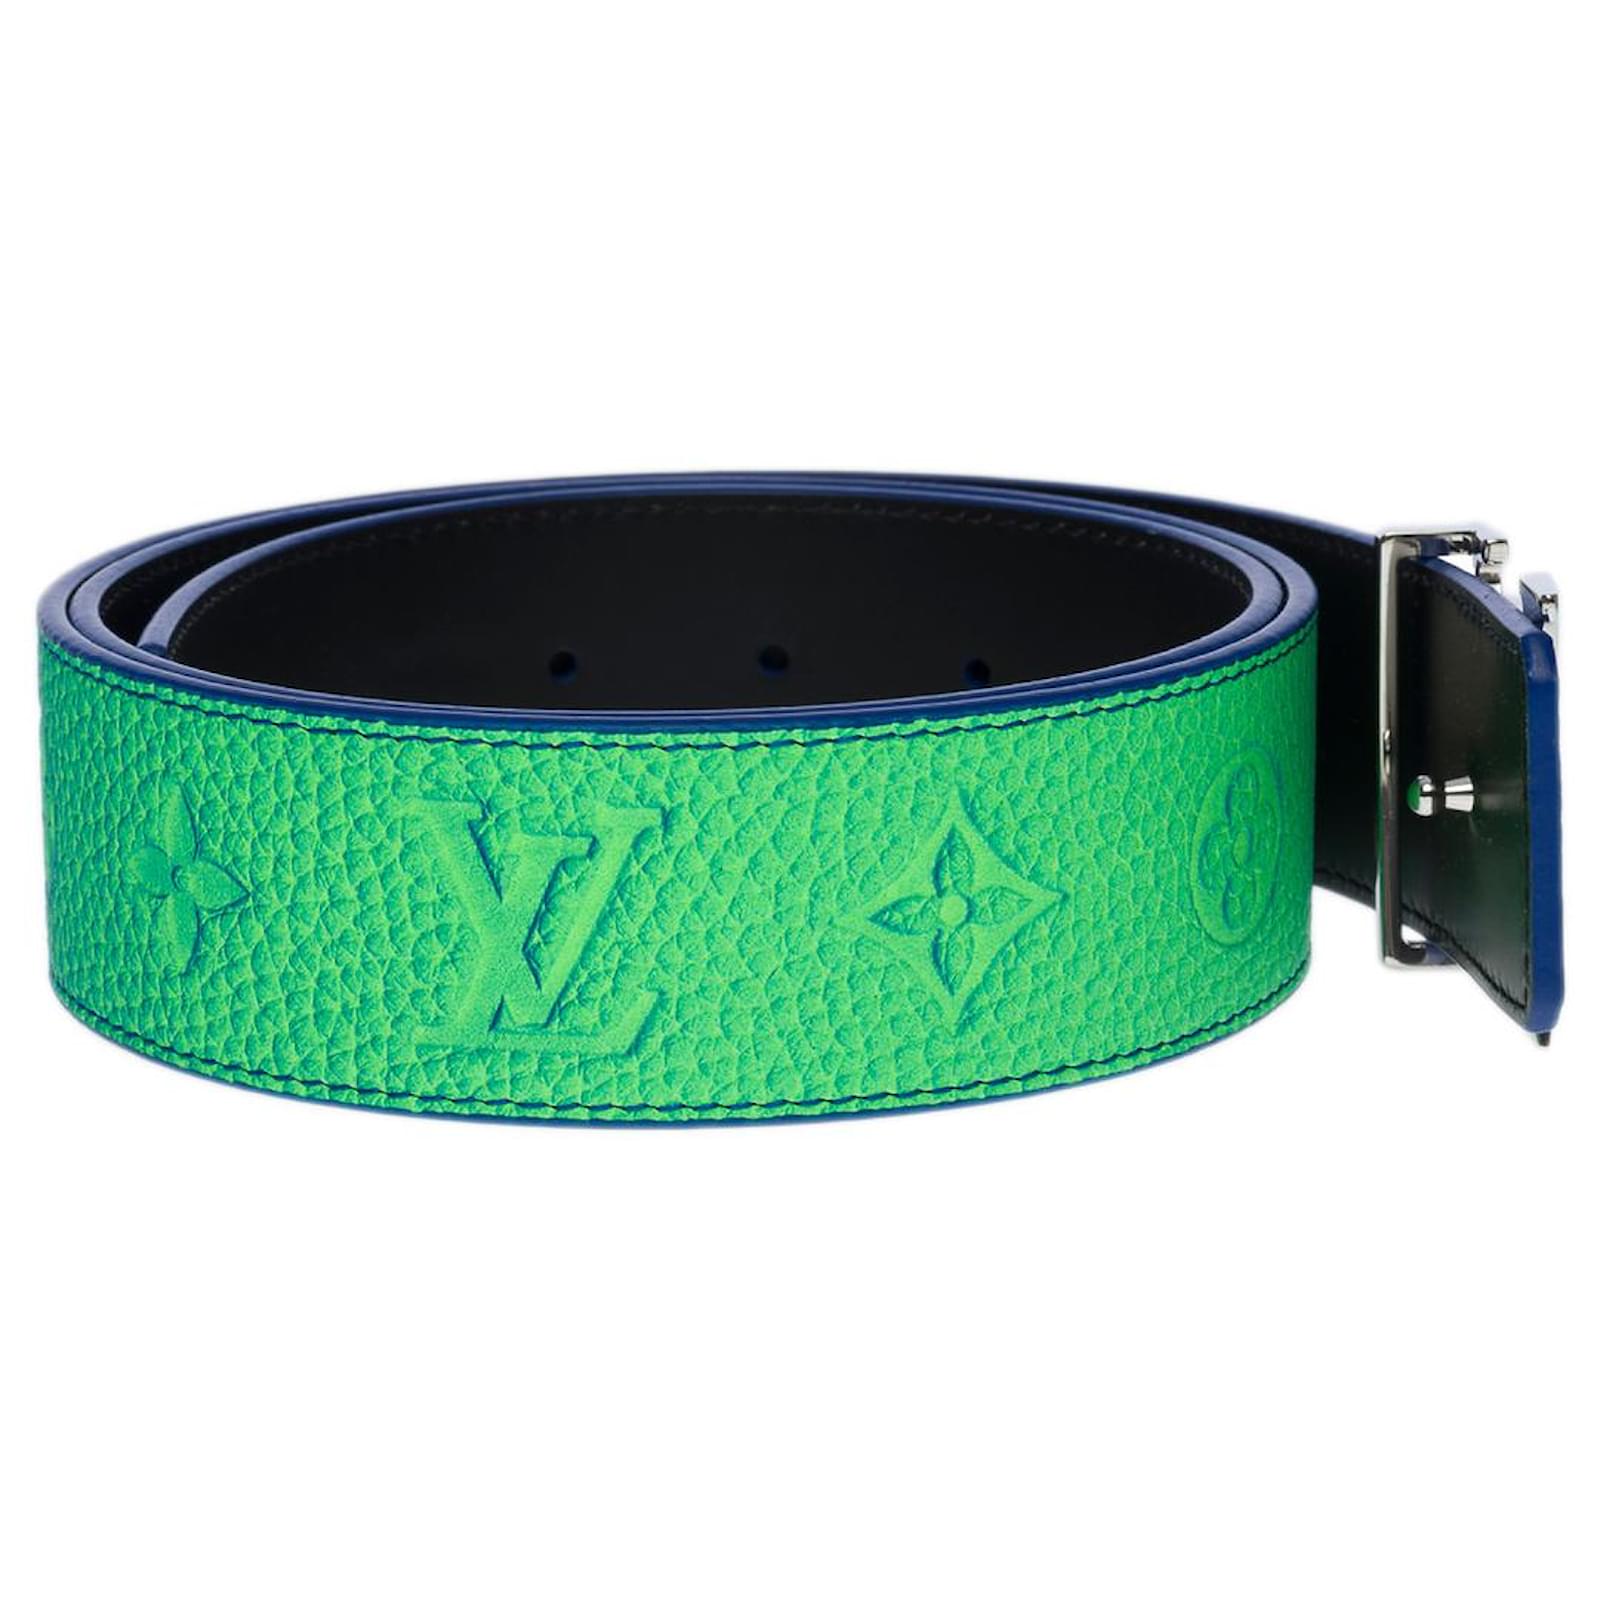 SOLD OUT - LOUIS VUITTON TAURILLON ILLUSION BLUE AND GREEN BELT